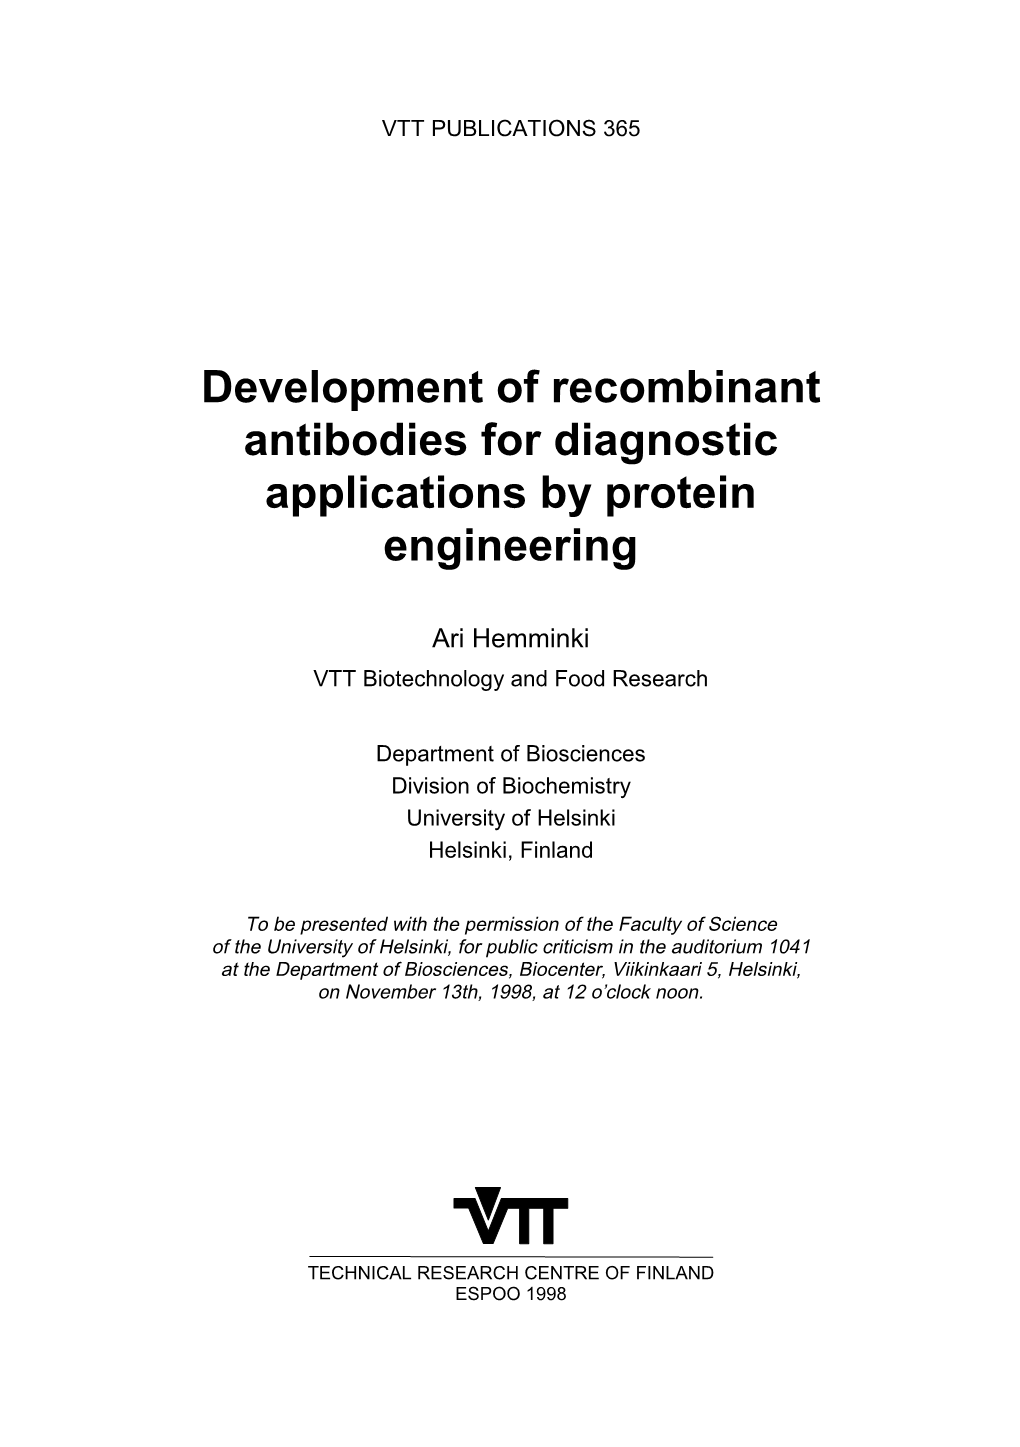 Development of Recombinant Antibodies for Diagnostic Applications by Protein Engineering